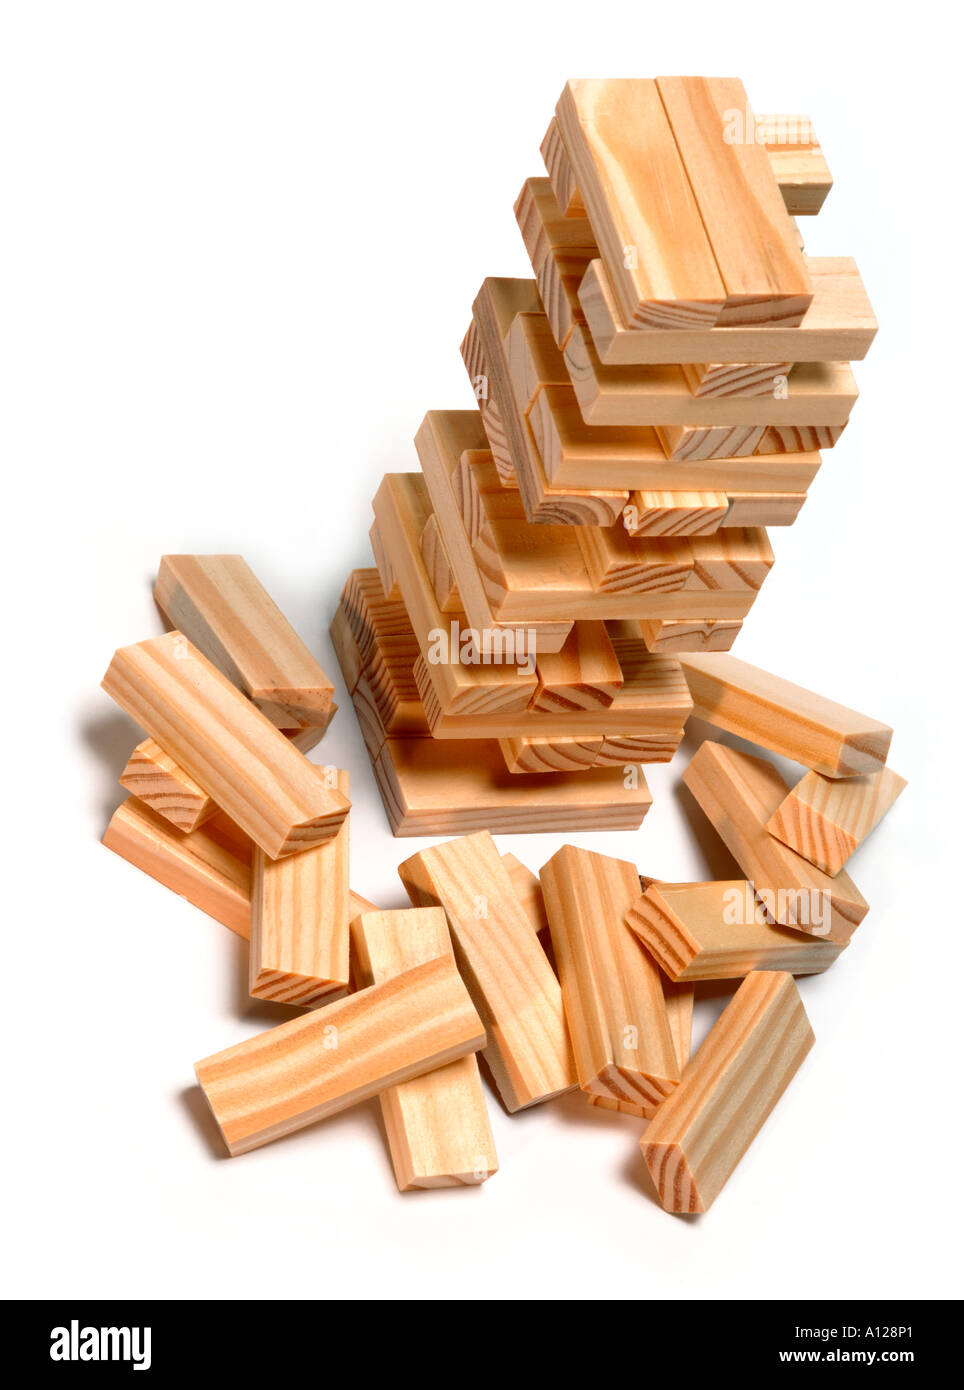 Wooden building block toy Stock Photo